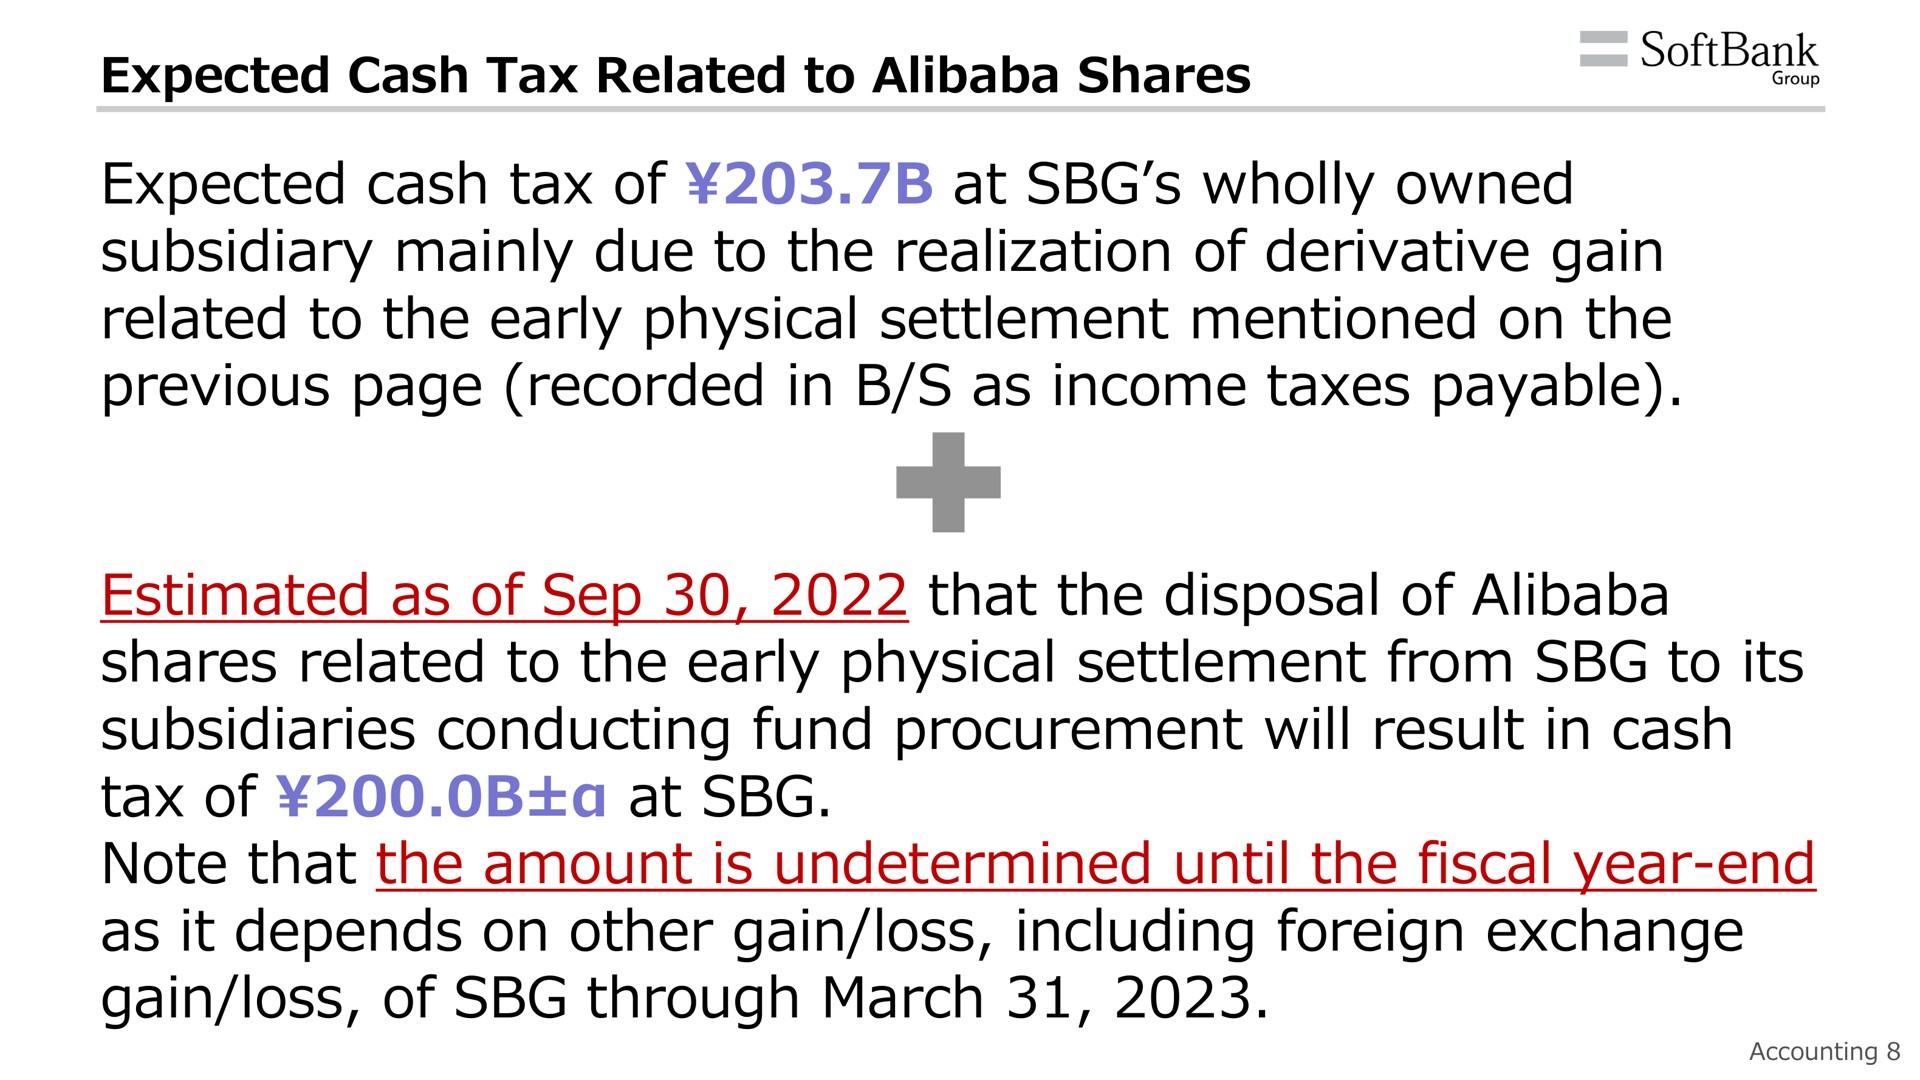 expected cash tax related to shares expected cash tax of at wholly owned subsidiary mainly due to the realization of derivative gain related to the early physical settlement mentioned on the previous page recorded in as income taxes payable estimated as of that the disposal of shares related to the early physical settlement from to its subsidiaries conducting fund procurement will result in cash tax of at note that the amount is undetermined until the fiscal year end as it depends on other gain loss including foreign exchange gain loss of through march a | SoftBank